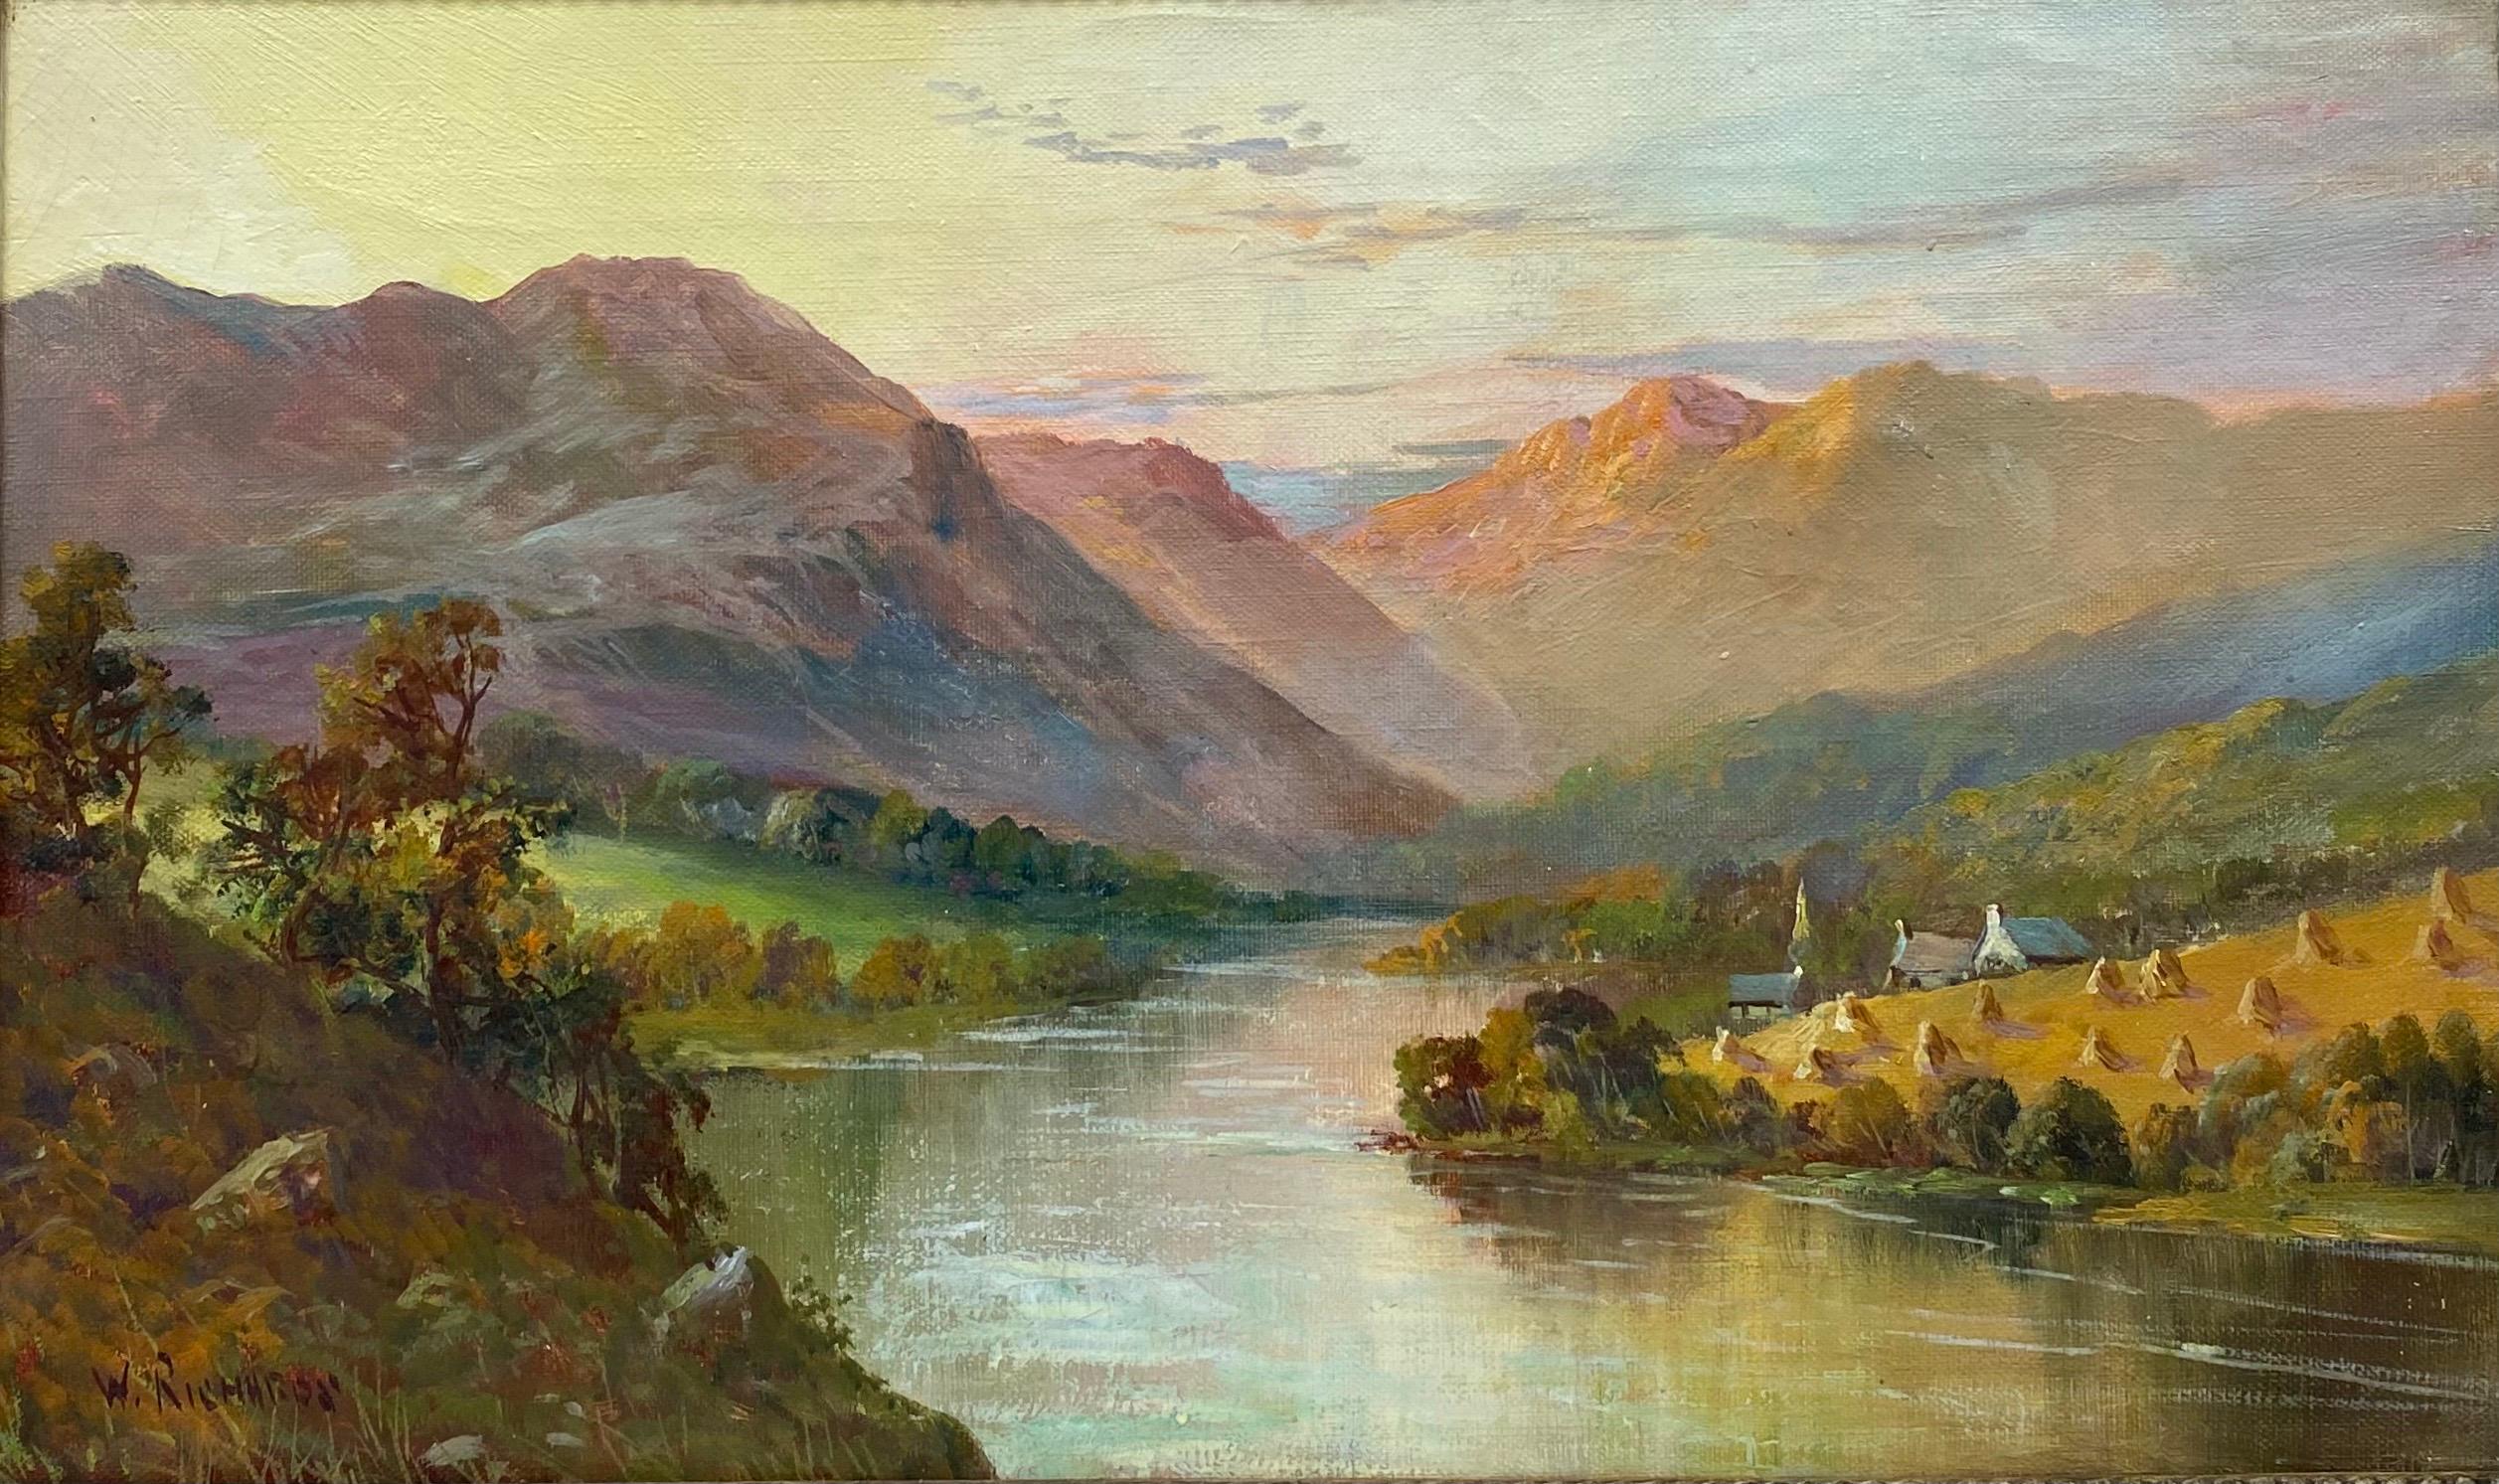 Francis E. Jamieson Landscape Painting - Antique Scottish Highlands Oil Painting Golden Harvest Field by the River Bank